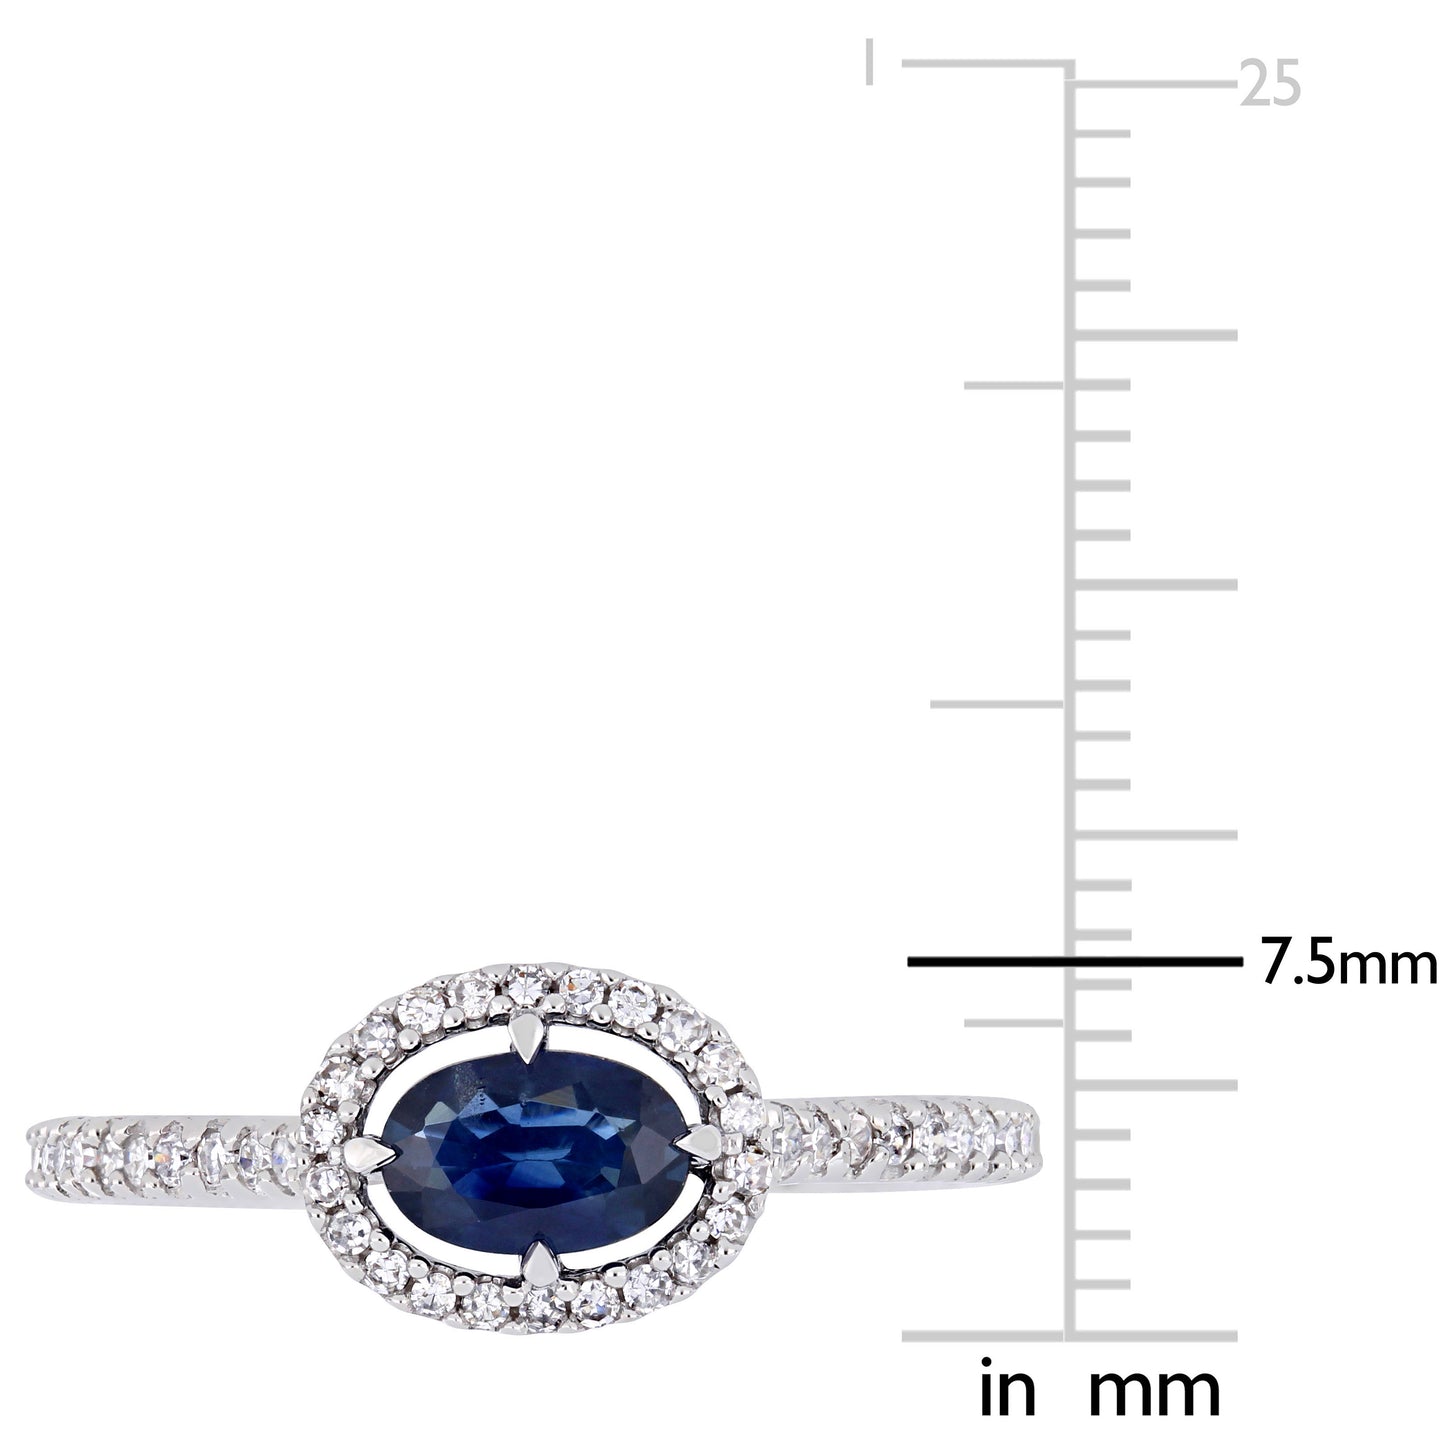 East-West Oval Cut Sapphire & Diamond Floating Ring in 14k White Gold